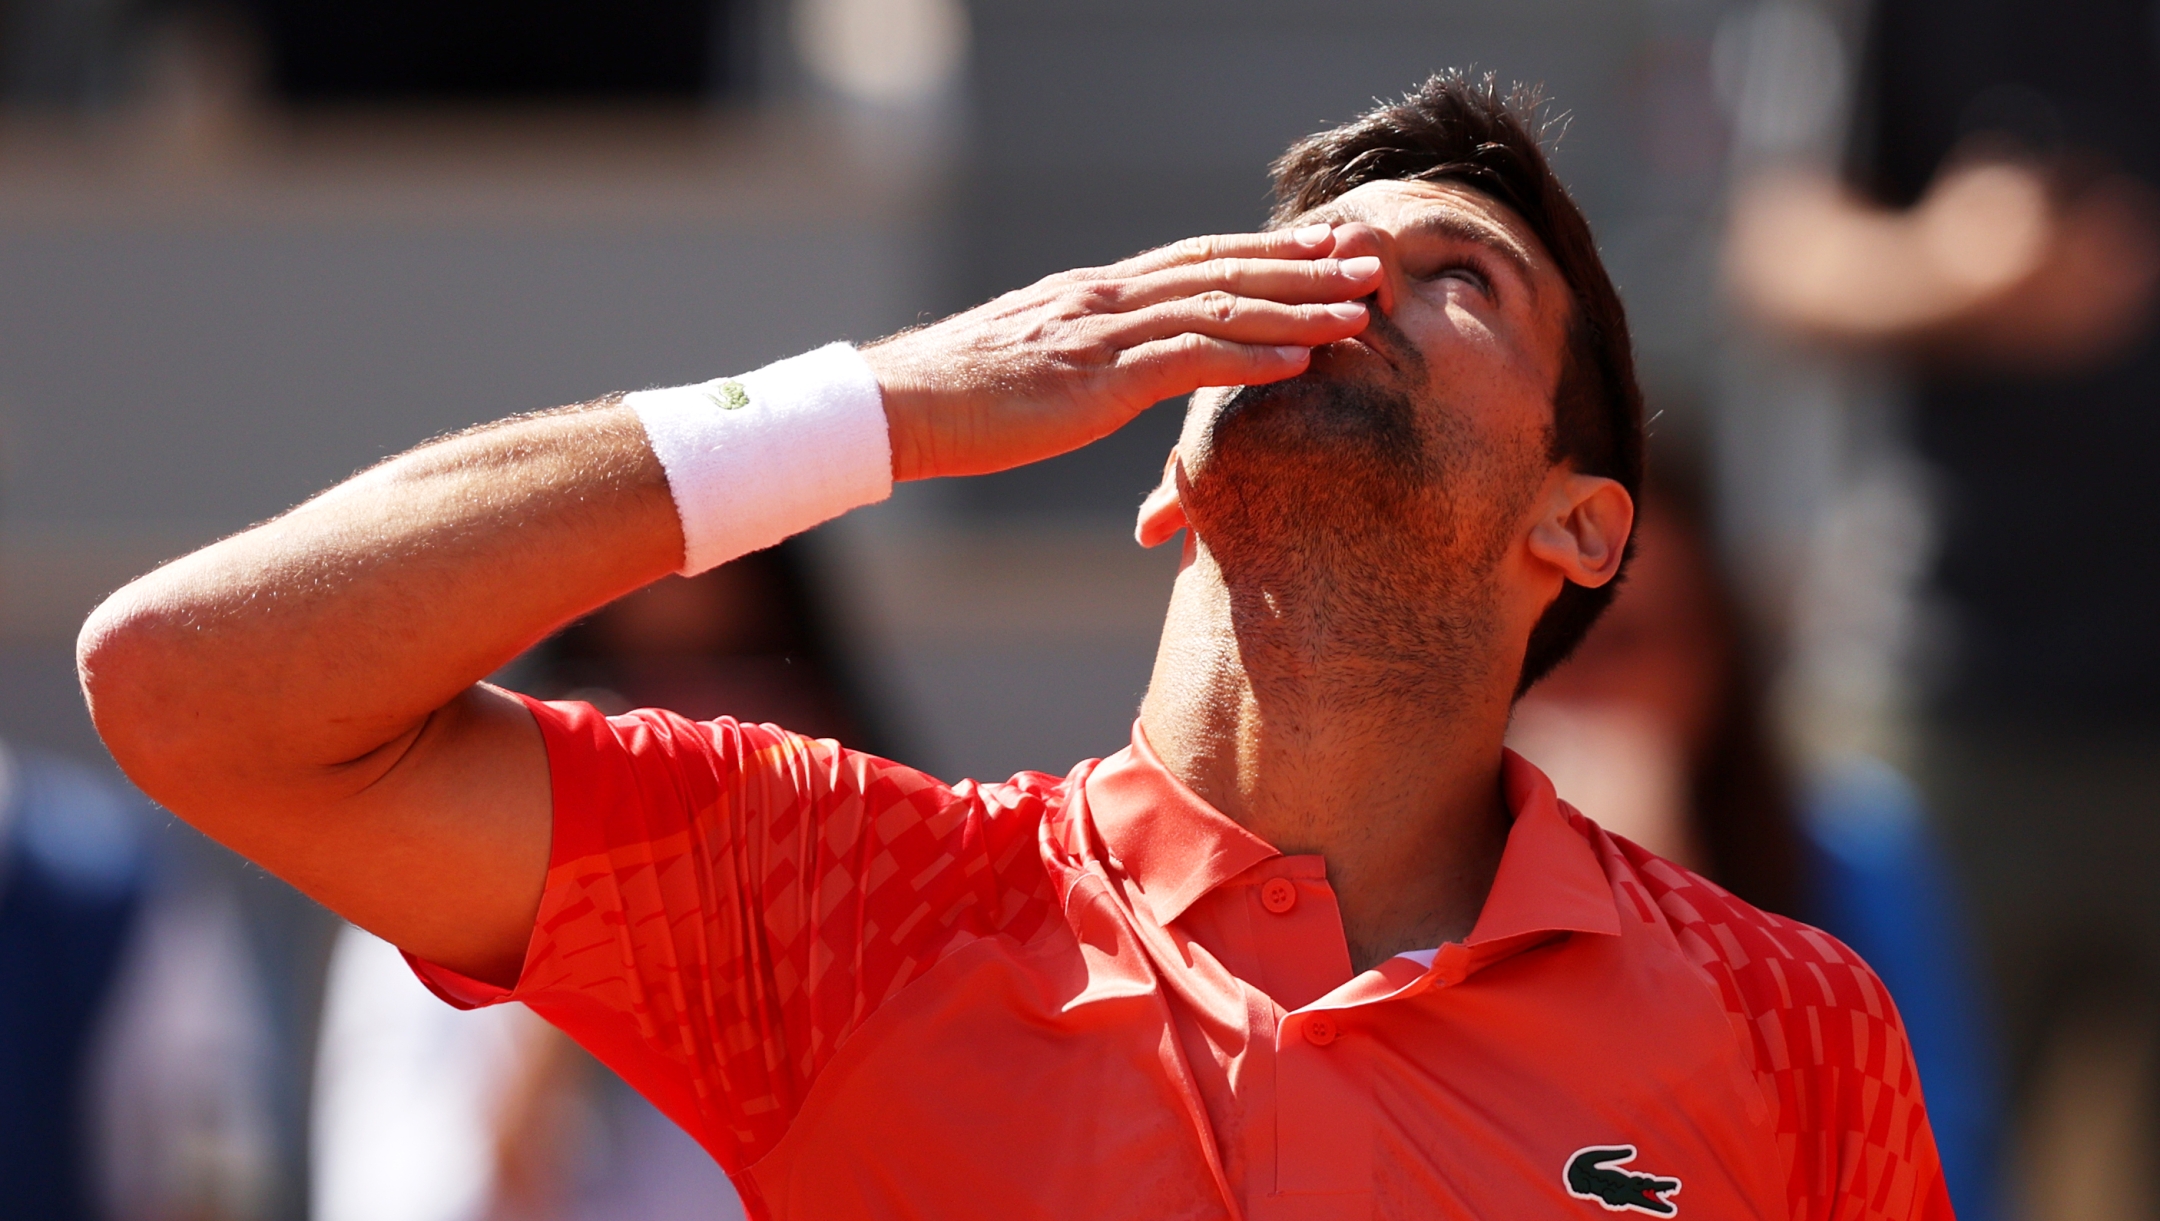 PARIS, FRANCE - MAY 29: Novak Djokovic of Serbia celebrates after winning match point against Aleksandar Kovacevic of United States during their Men's Singles First Round Match on Day Two of the 2023 French Open at Roland Garros on May 29, 2023 in Paris, France. (Photo by Clive Brunskill/Getty Images)